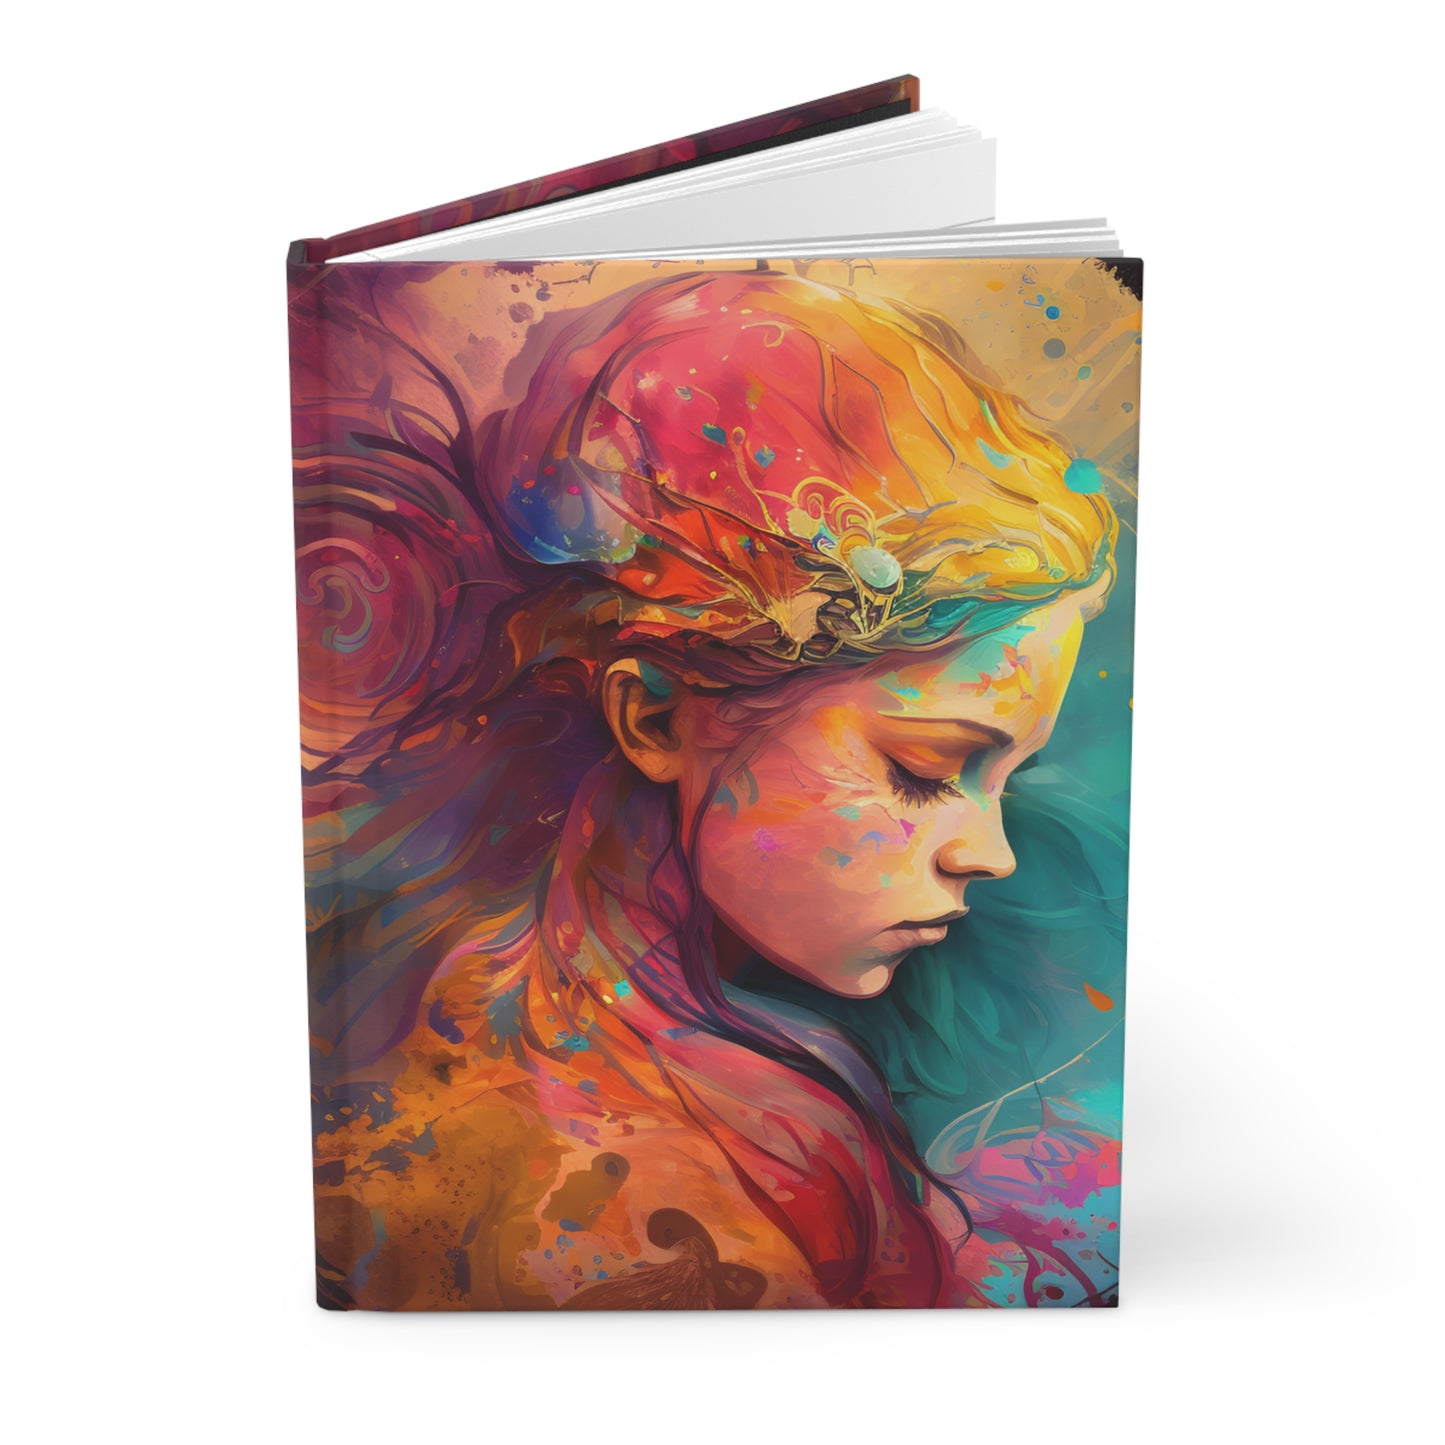 Virgo the Artist Hardcover 150 Page Journal